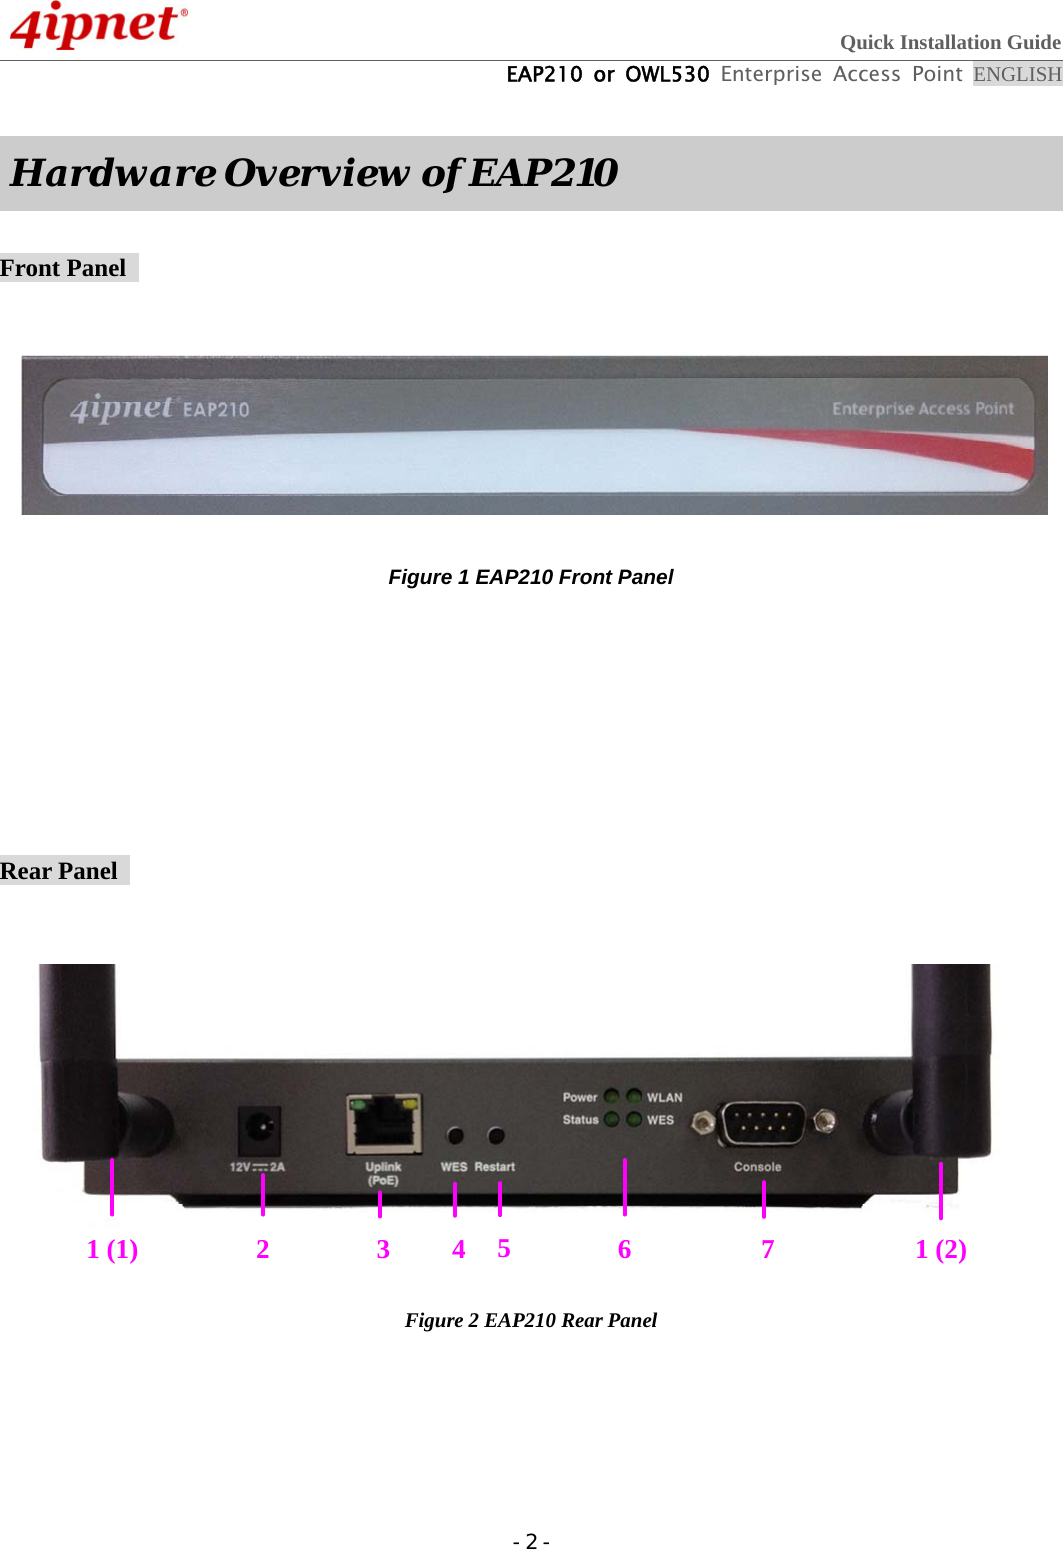  Quick Installation Guide  EAP210 or OWL530 Enterprise Access Point ENGLISH  - 2 -  Hardware Overview of EAP210  Front Panel    Figure 1 EAP210 Front Panel       Rear Panel    1 (1) 2 3 71 (2)456Figure 2 EAP210 Rear Panel      